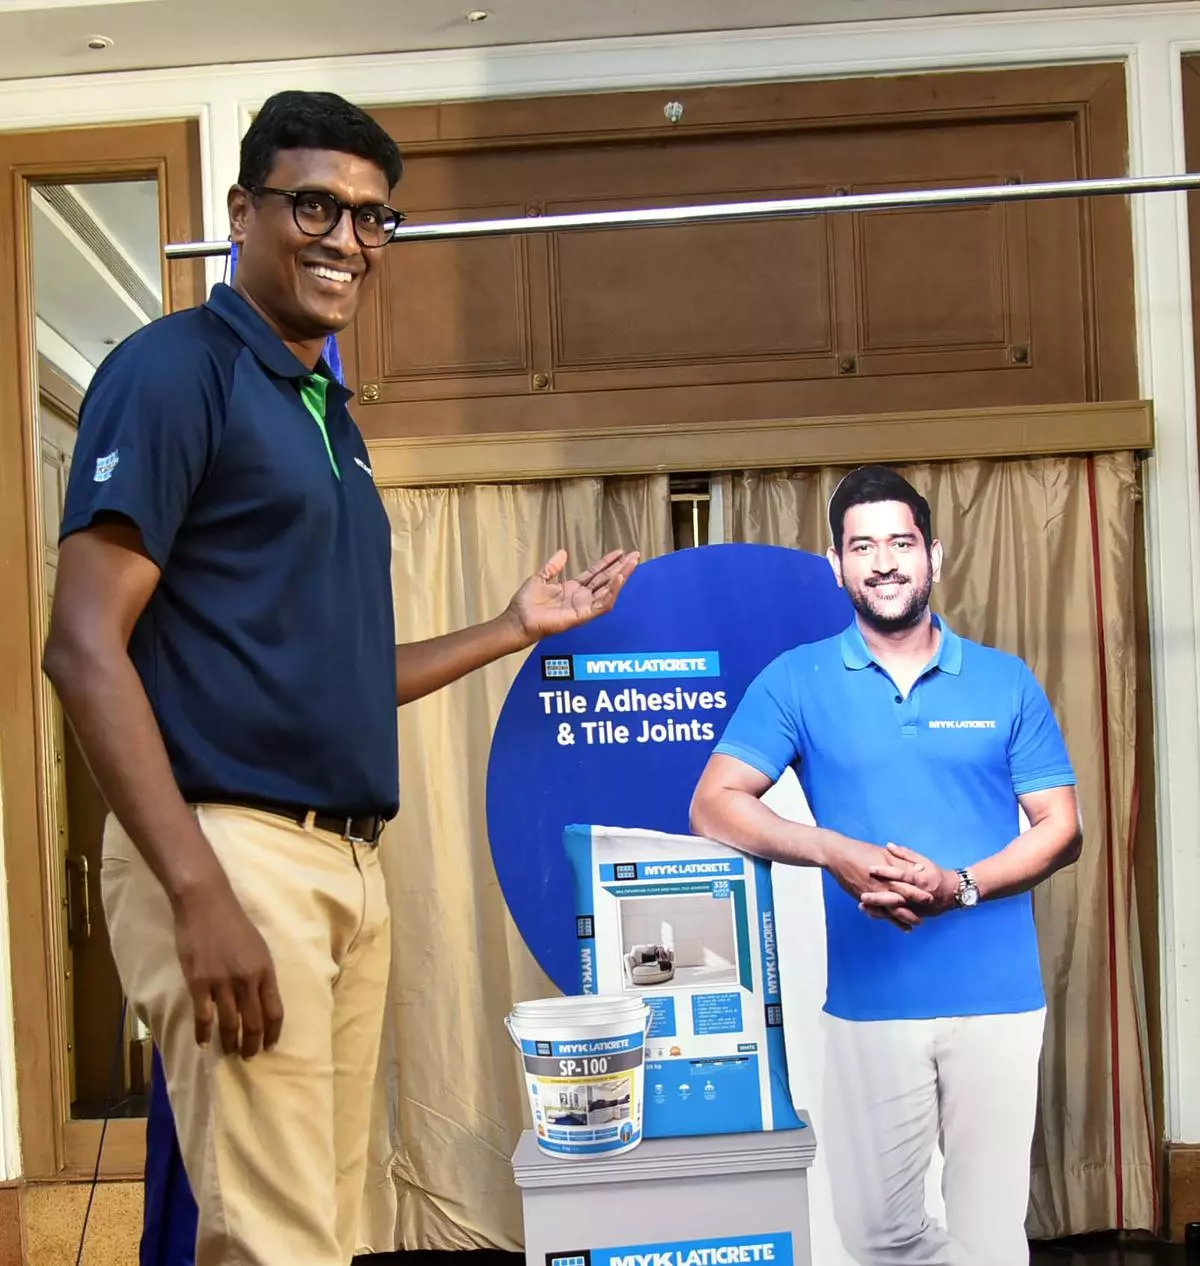 Murali Yadama, Managing Director of MYK Laticrete with a cut-out of cricketer M S Dhoni 